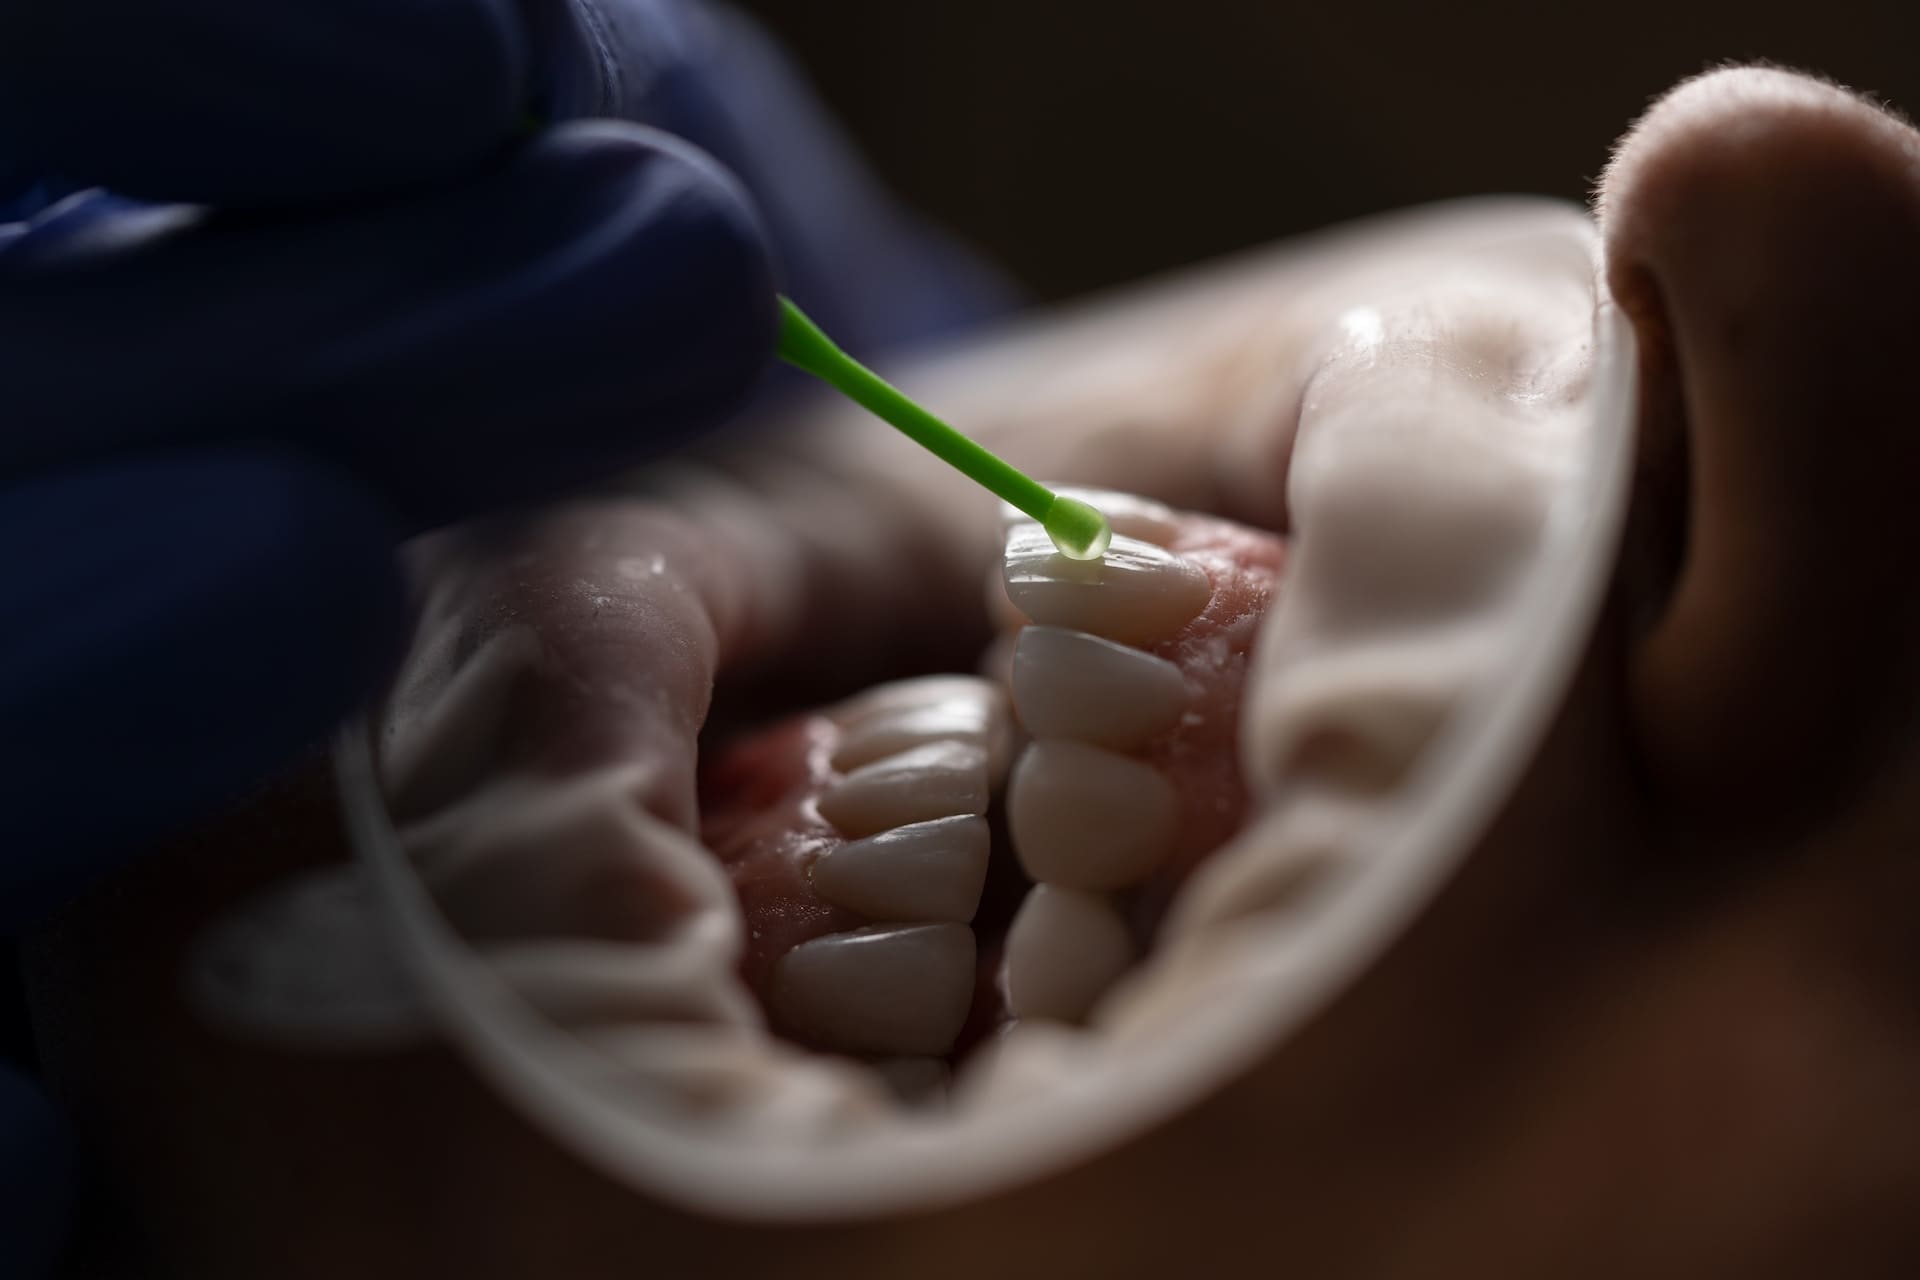 Dentist gently cleaning patient's teeth with the assistance of a mouth opening instrument.